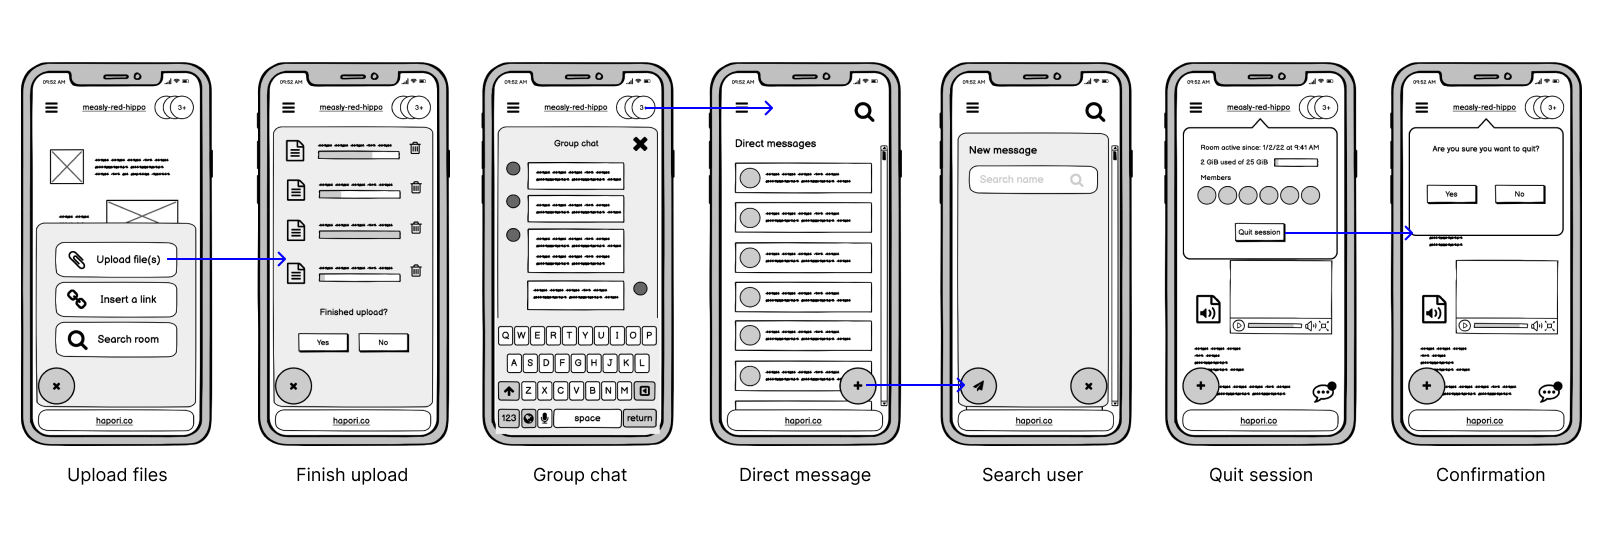 Userflow shown as a low fidelity paper wireframe.